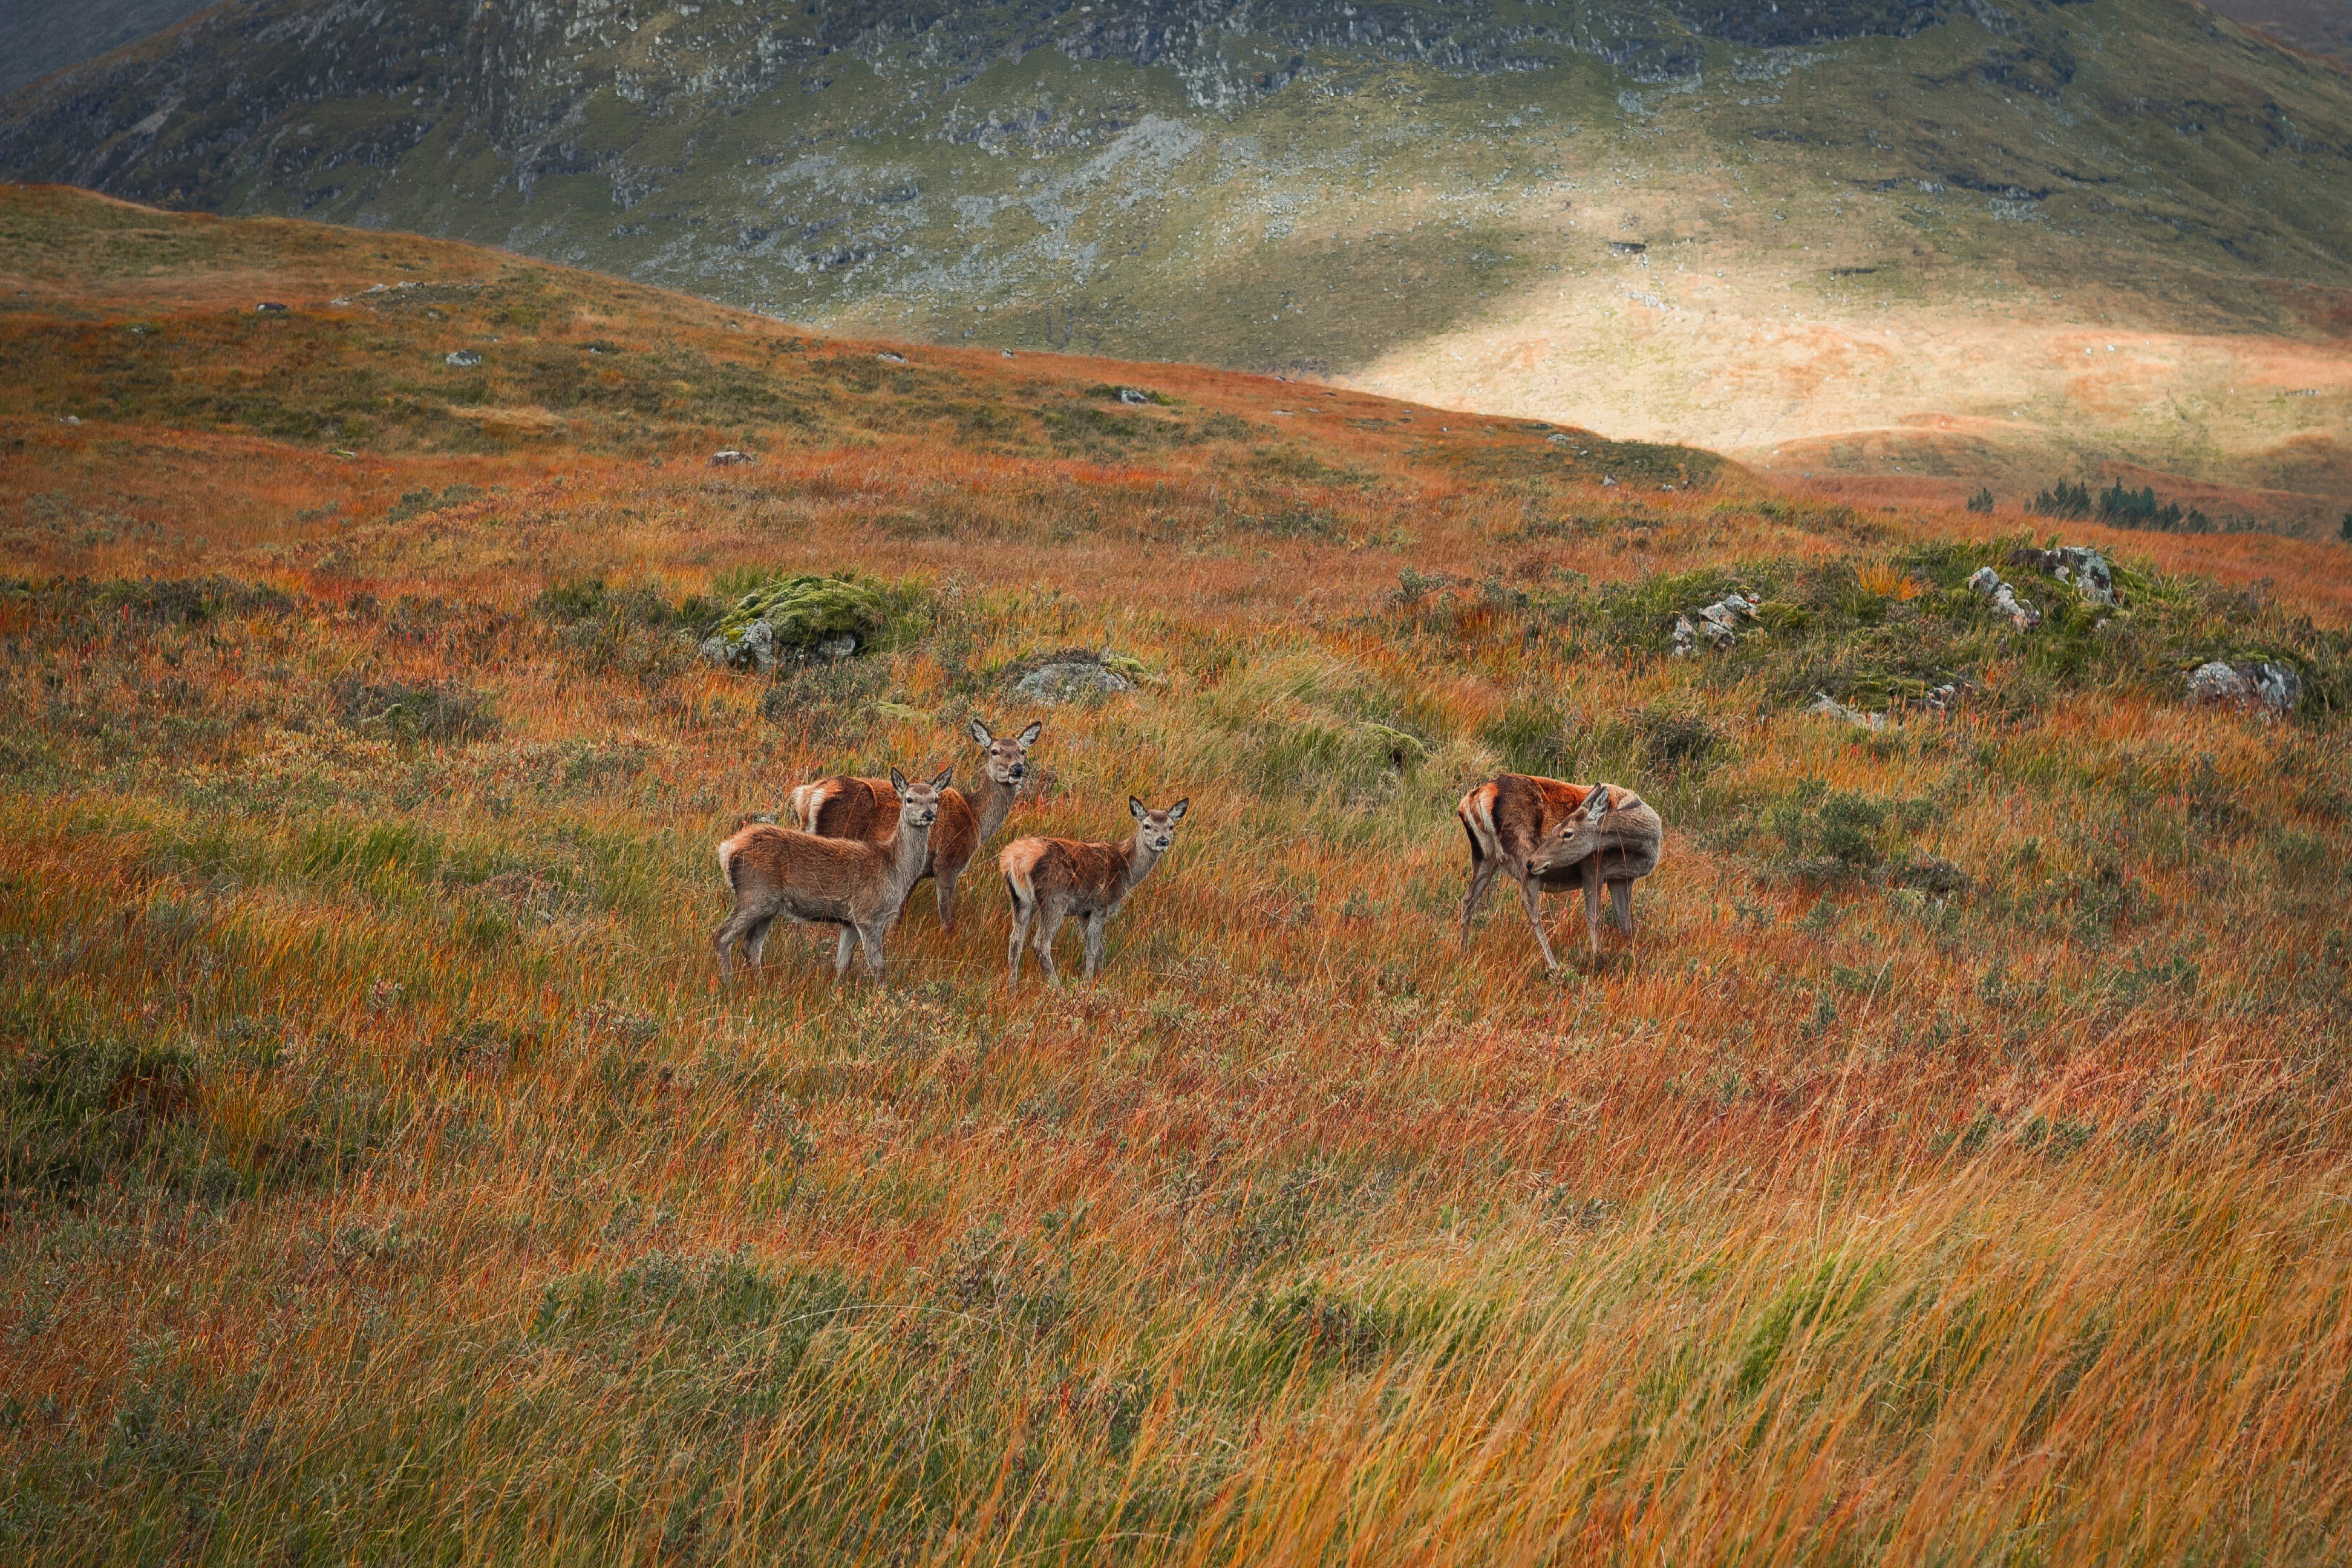 A herd of deer roaming undergrowth with the breathtaking landscape of the Scottish Highlands in the background